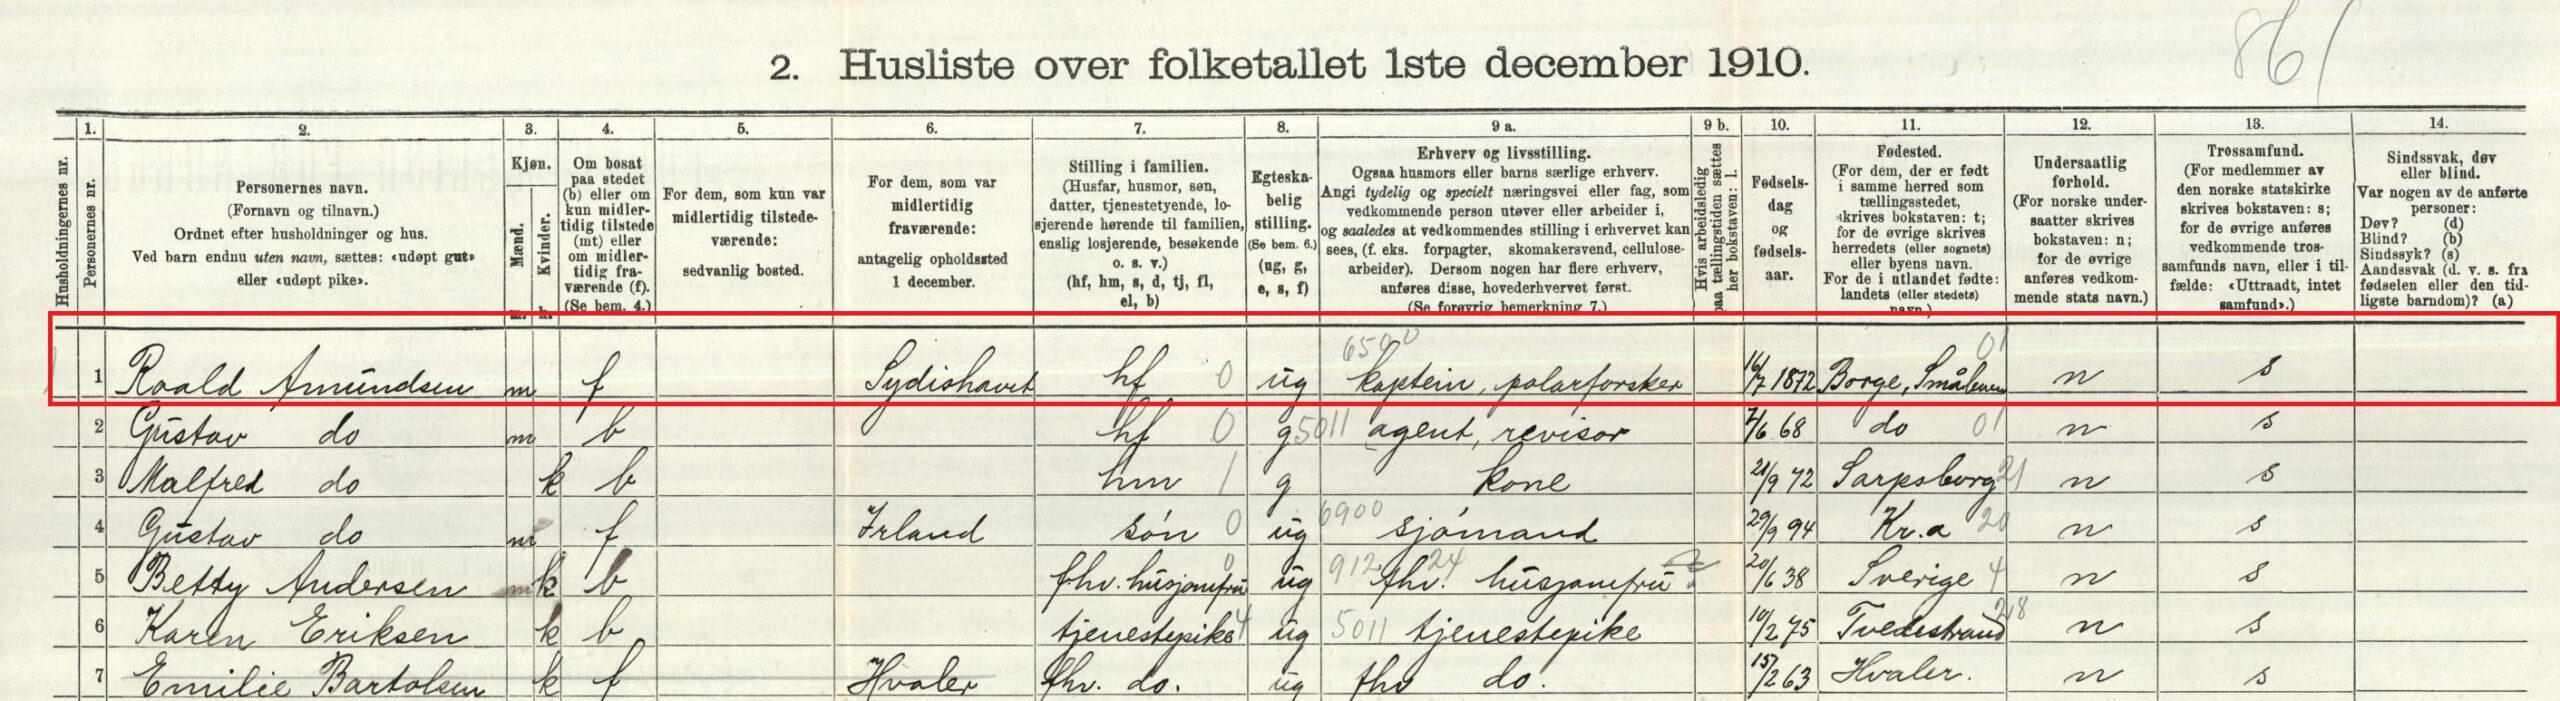 Record of Roald Amudsen in the 1910 Norway Census collection on MyHeritage